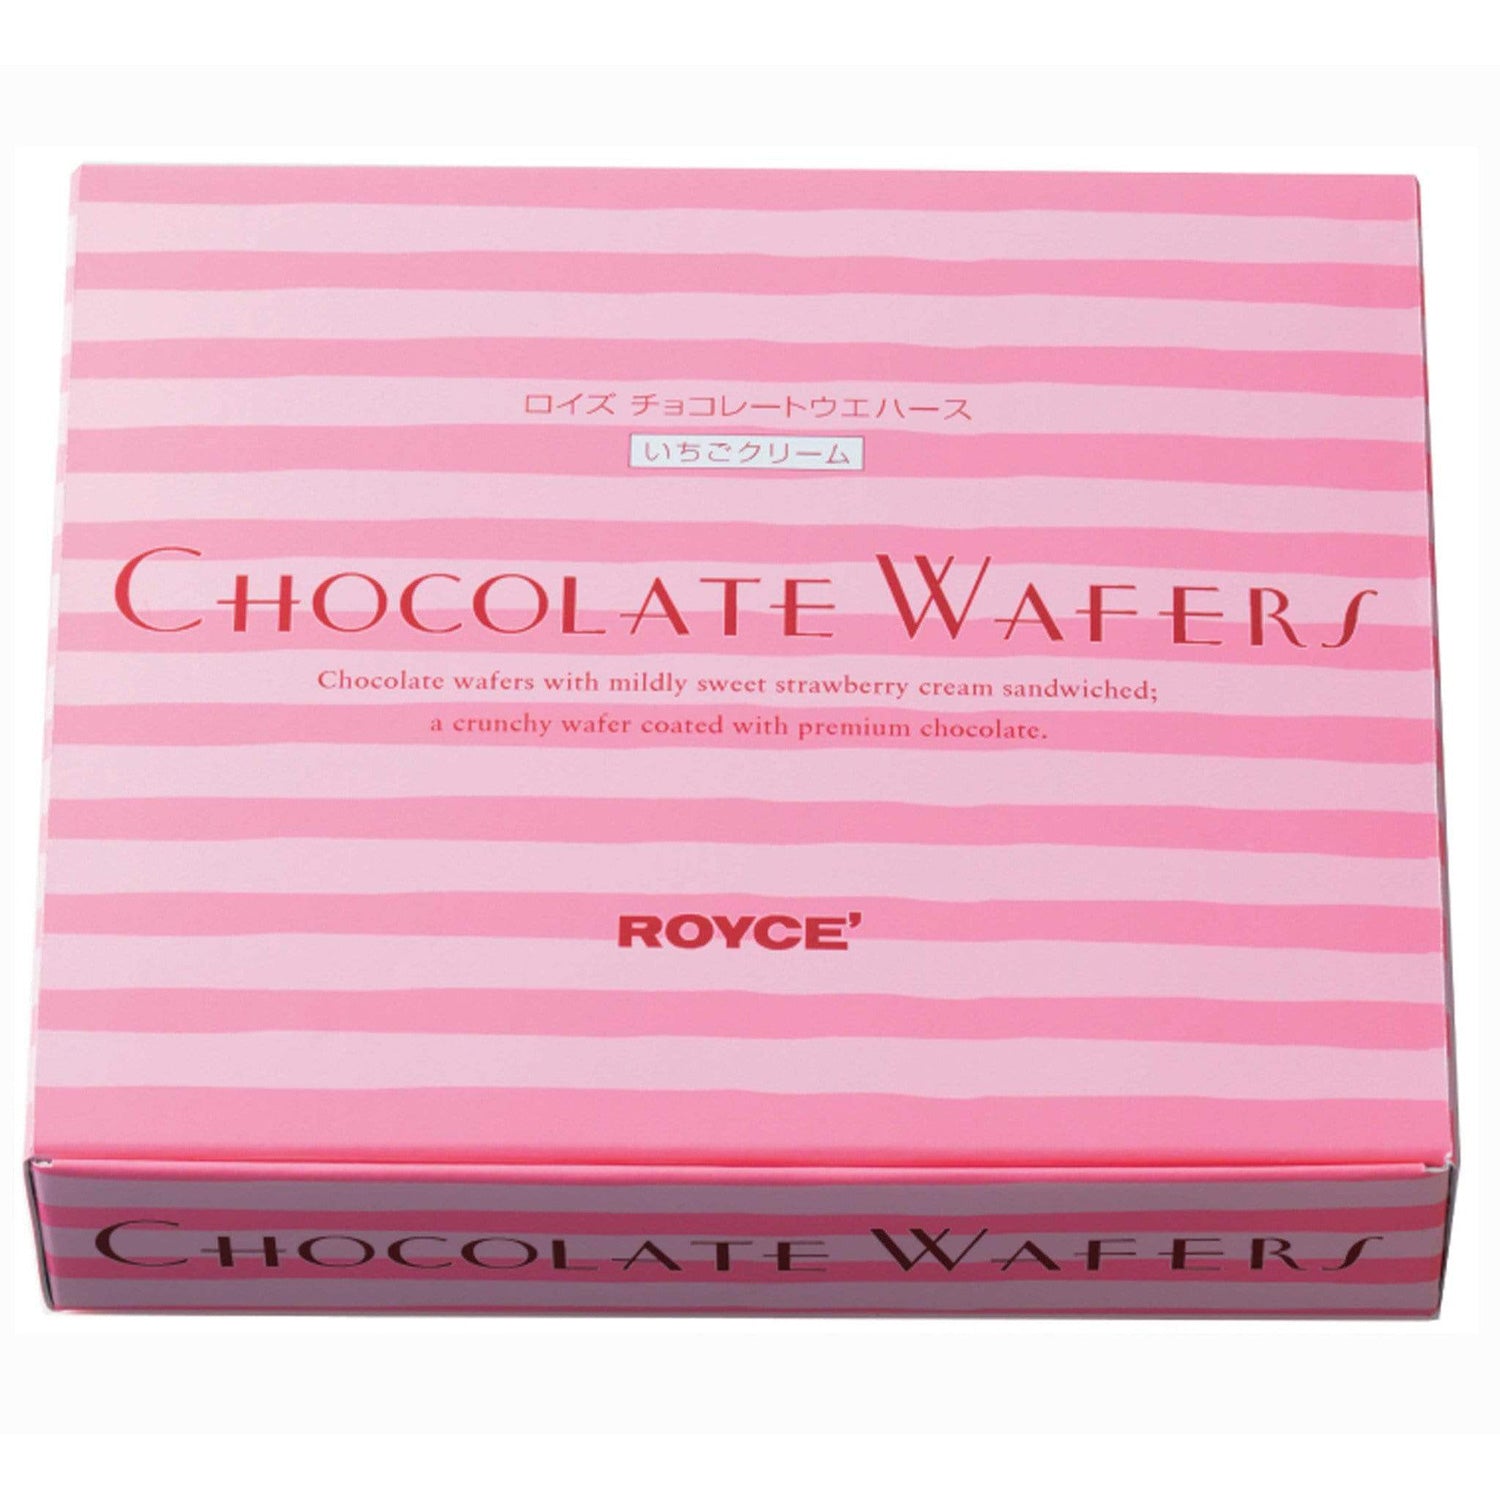 ROYCE' Chocolate - Chocolate Wafers "Strawberry Cream" - Image shows a pink striped box. Red text says Chocolate Wafers Chocolate wafers with mildly sweet strawberry cream sandwiched; a crunchy wafer coated with premium chocolate. ROYCE'. Text on the bottom part says Chocolate Wafers. 